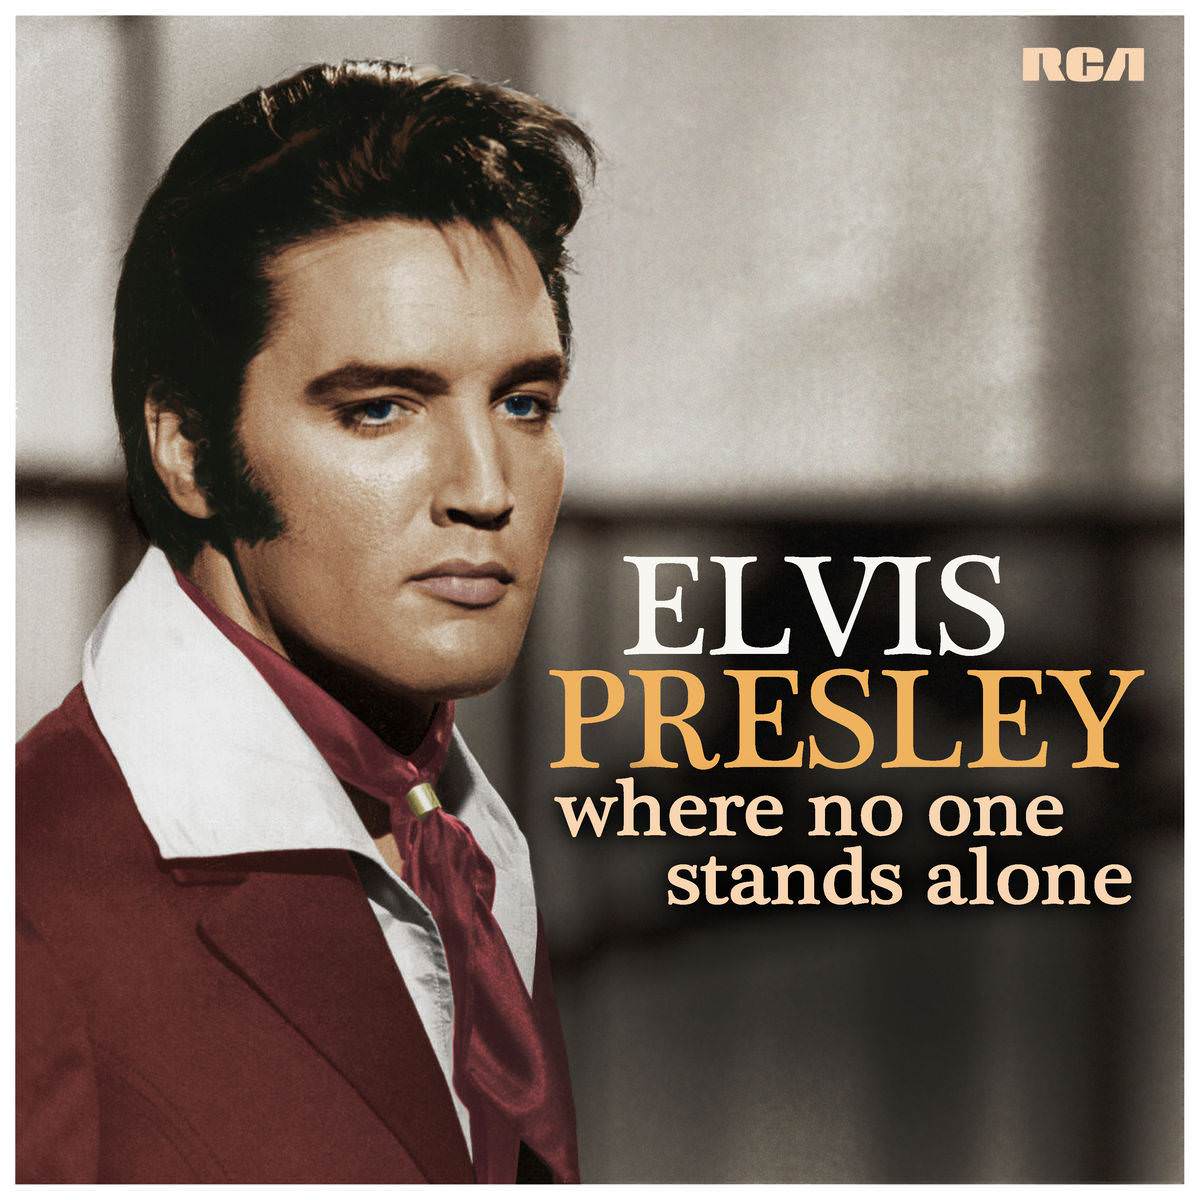 Elvis Presley – Where No One Stands Alone (Remastered) (1967/2018) [FLAC 24bit/96kHz]